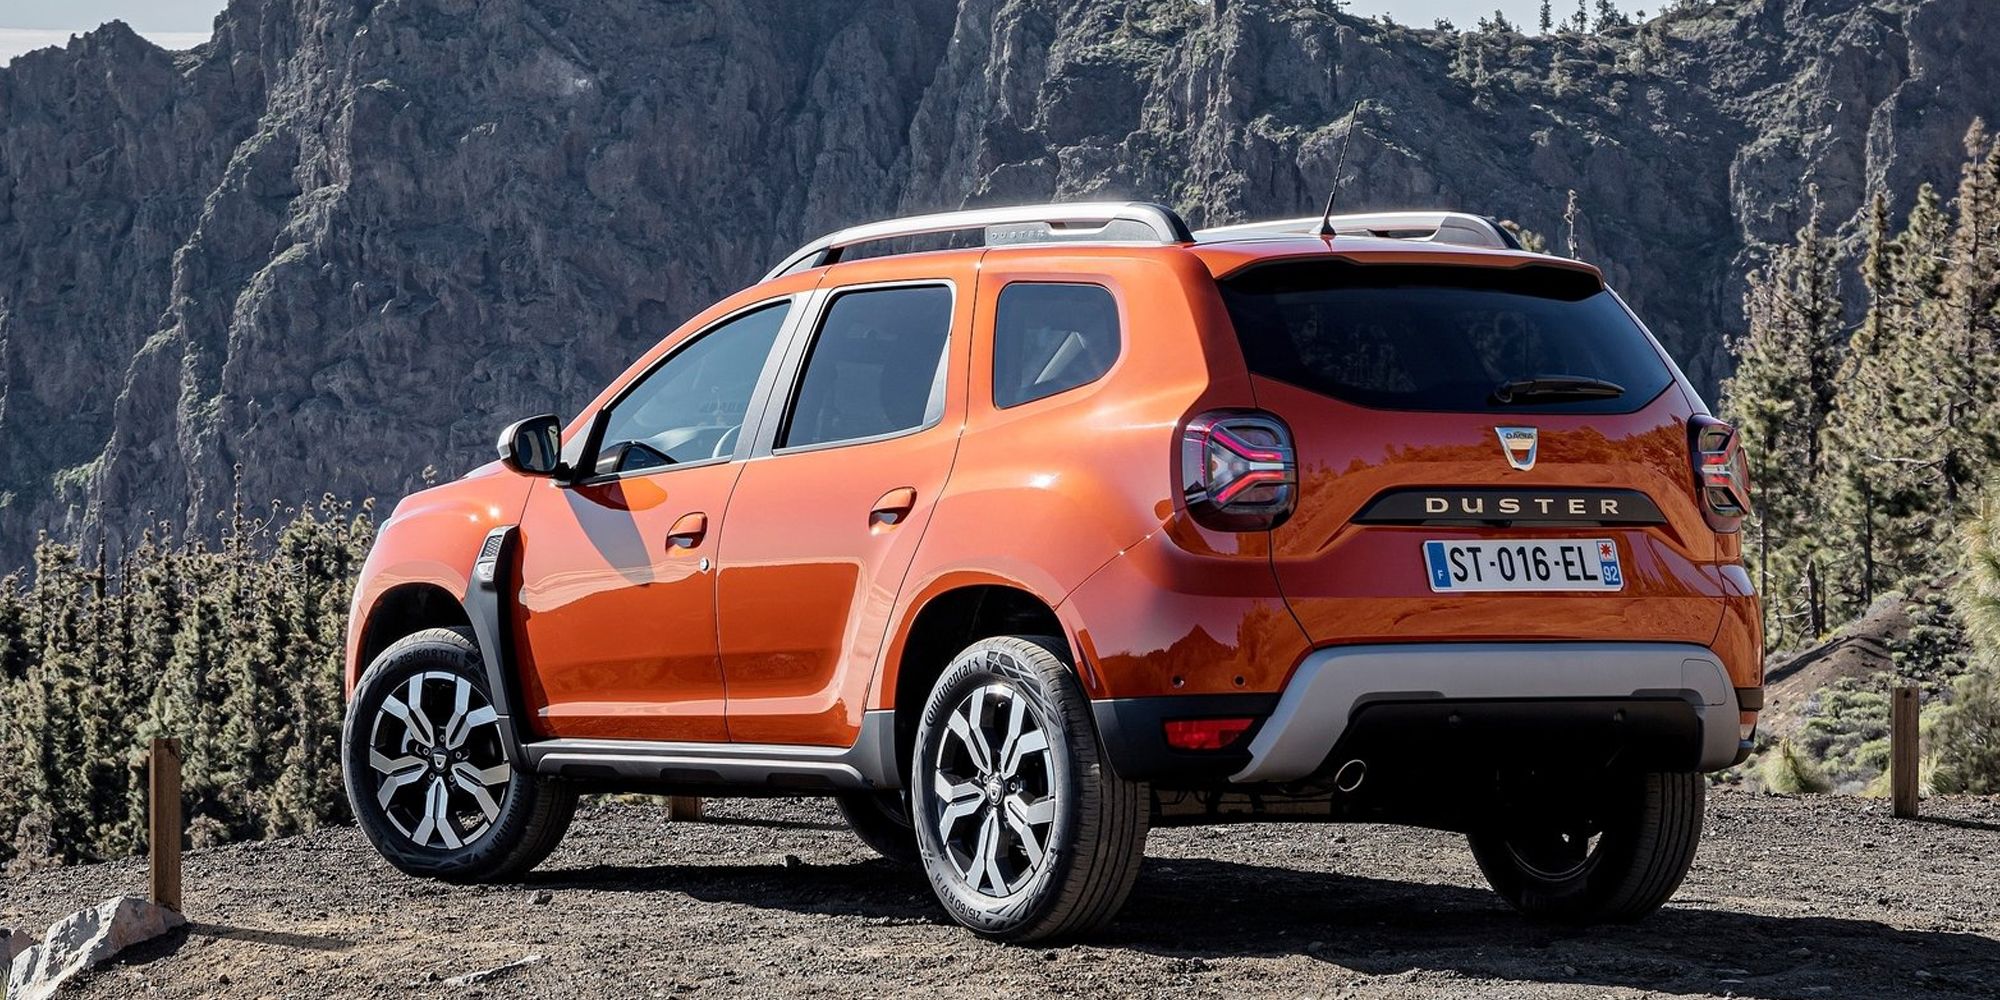 Rear 3/4 view of the Duster in orange